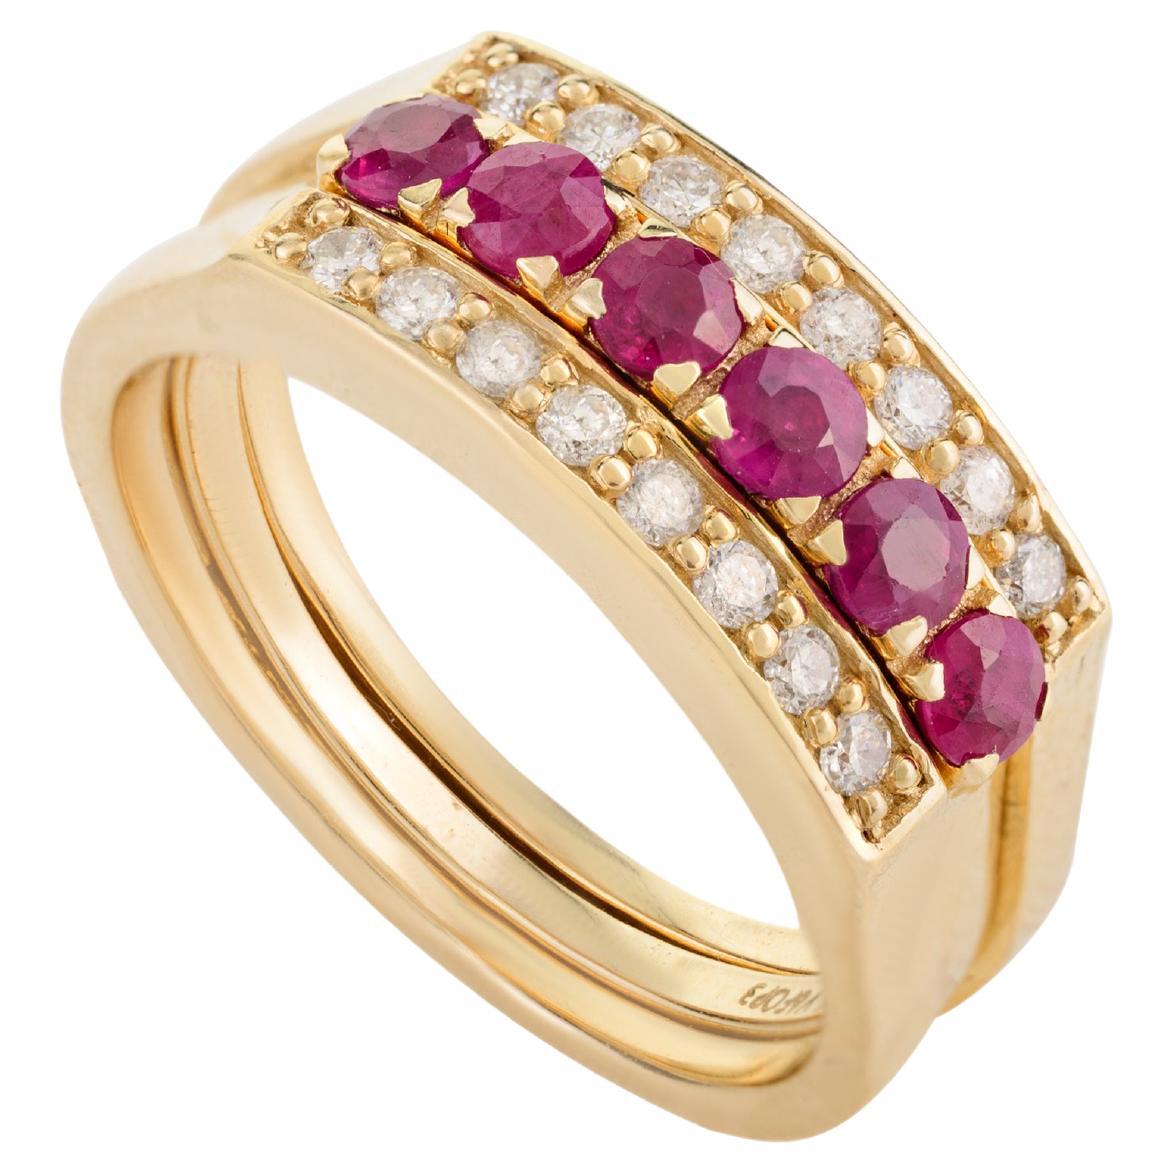 For Sale:  Unisex Two-in-One 14k Solid Yellow Gold Natural Ruby and Diamond Wedding Ring